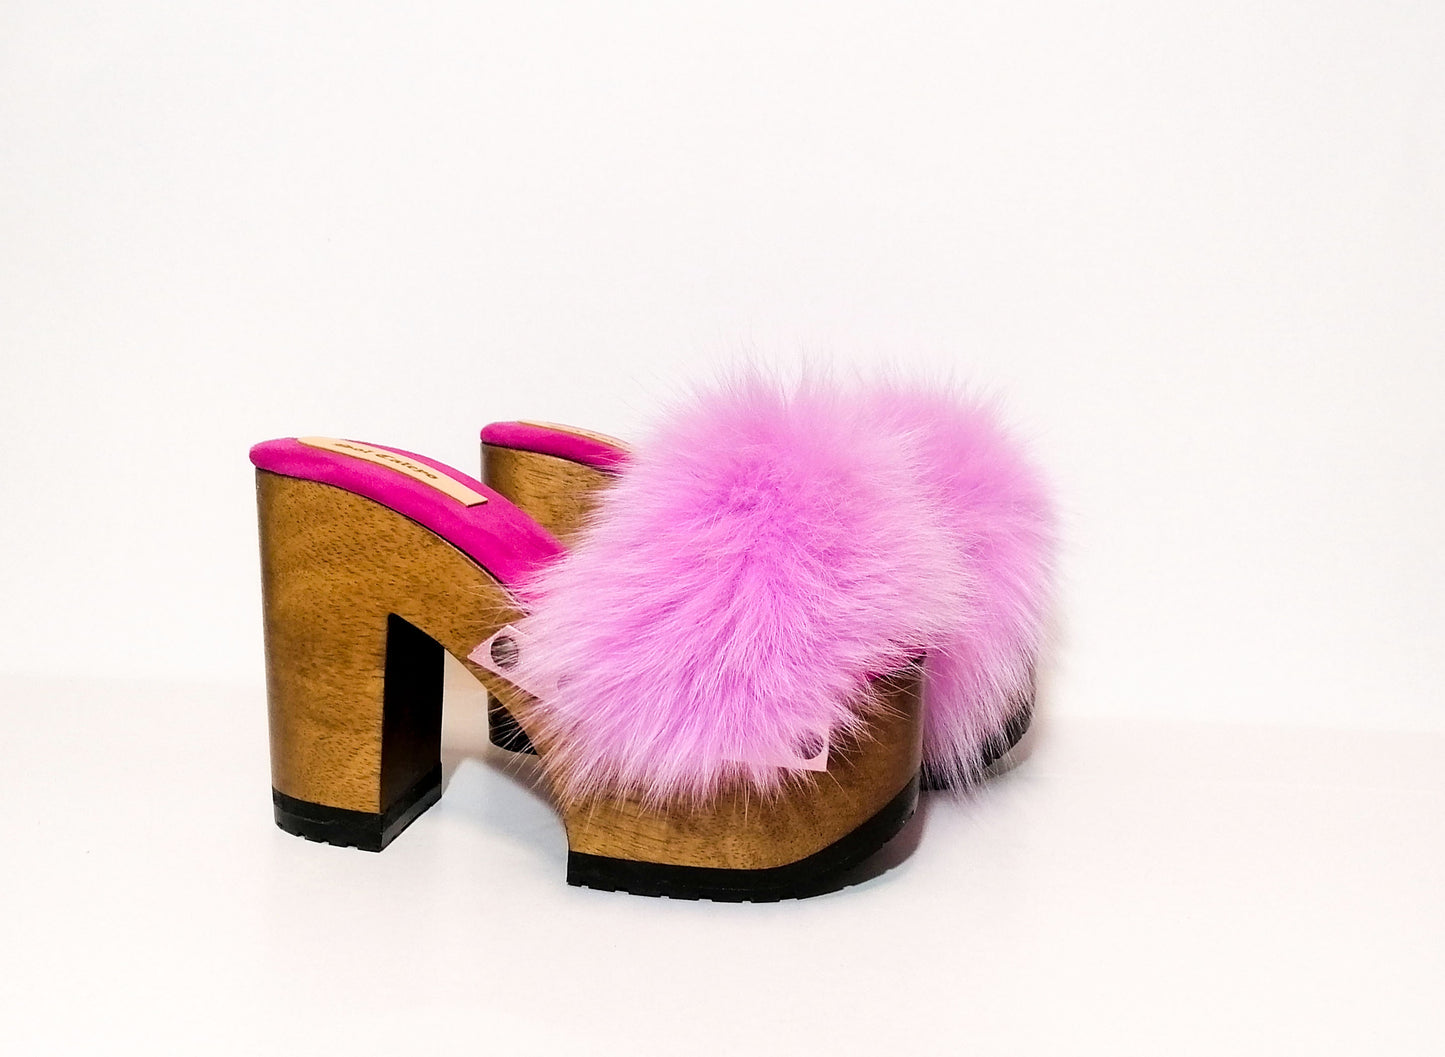 Vintage style pink platform clog sandals. Super high wooden heel sandal. Vintage 70's style platform sandal. Pink fur sandal peep toe style. Sizes 34 to 47. High quality leather shoes handmade by sol Caleyo. Sustainable fashion.